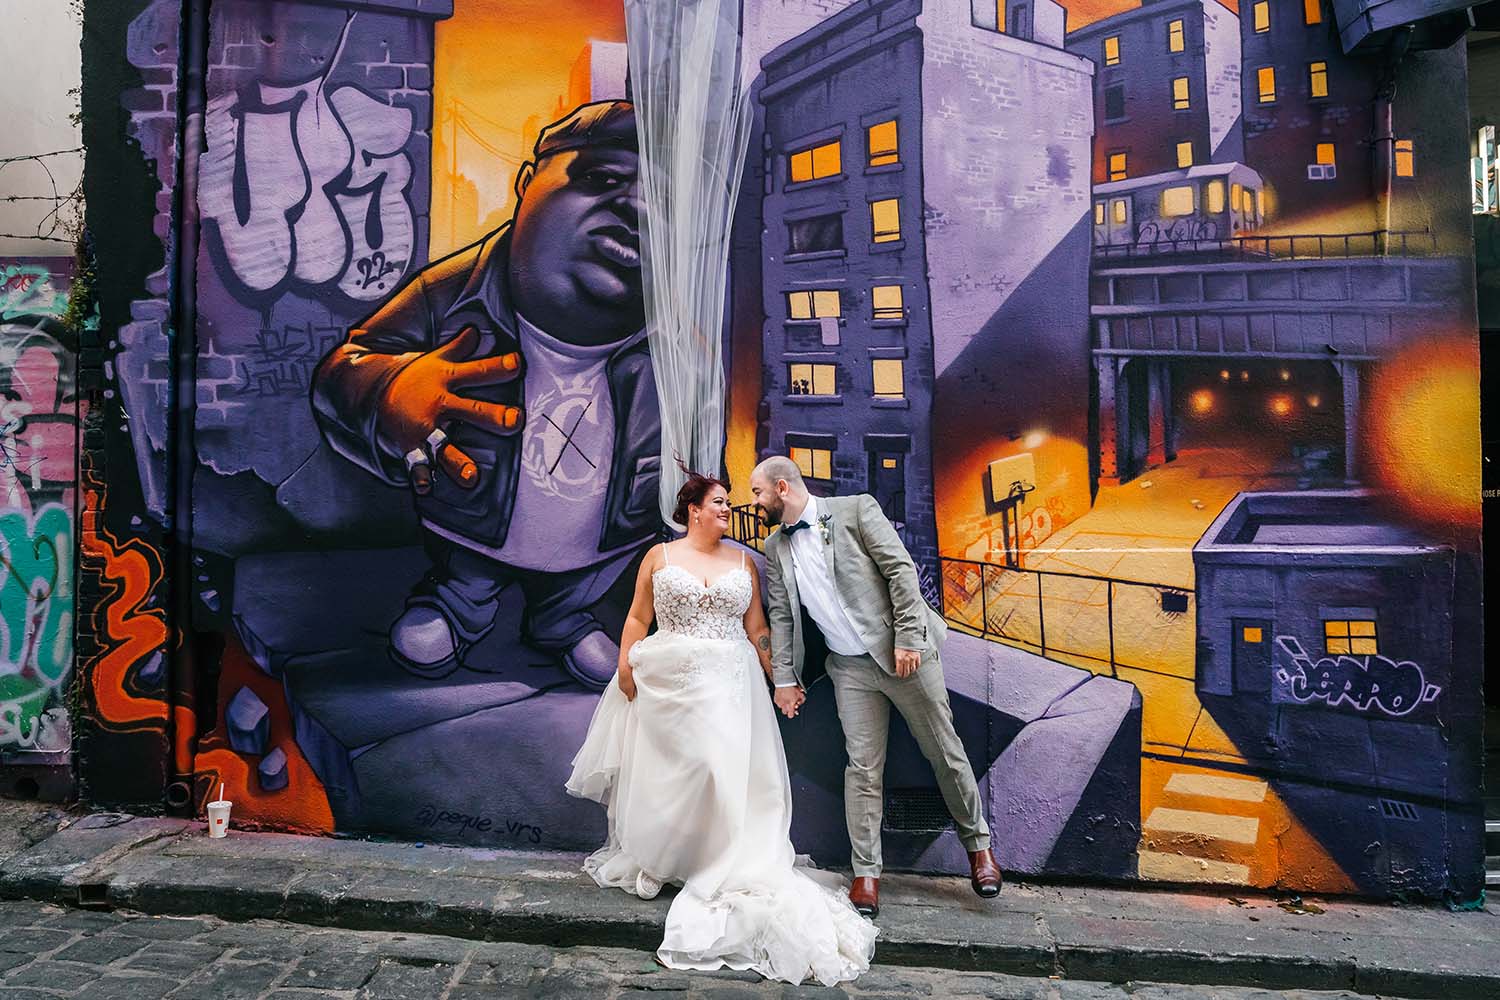 Destination Wedding Photography - Bride and Groom in front of Street Graffiti